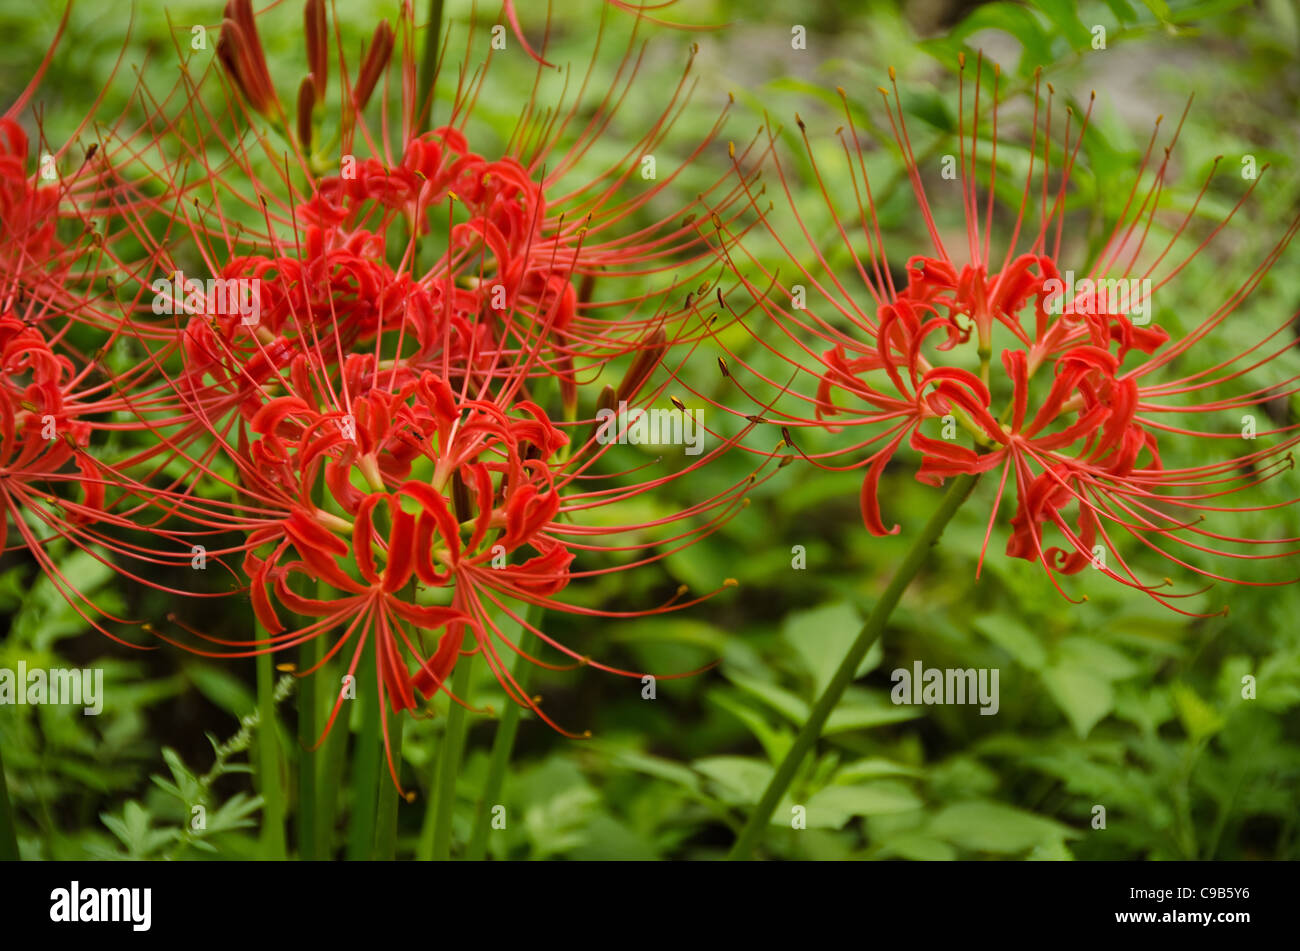 Flowers of the Red spider lily, Lycoris radiata Stock Photo